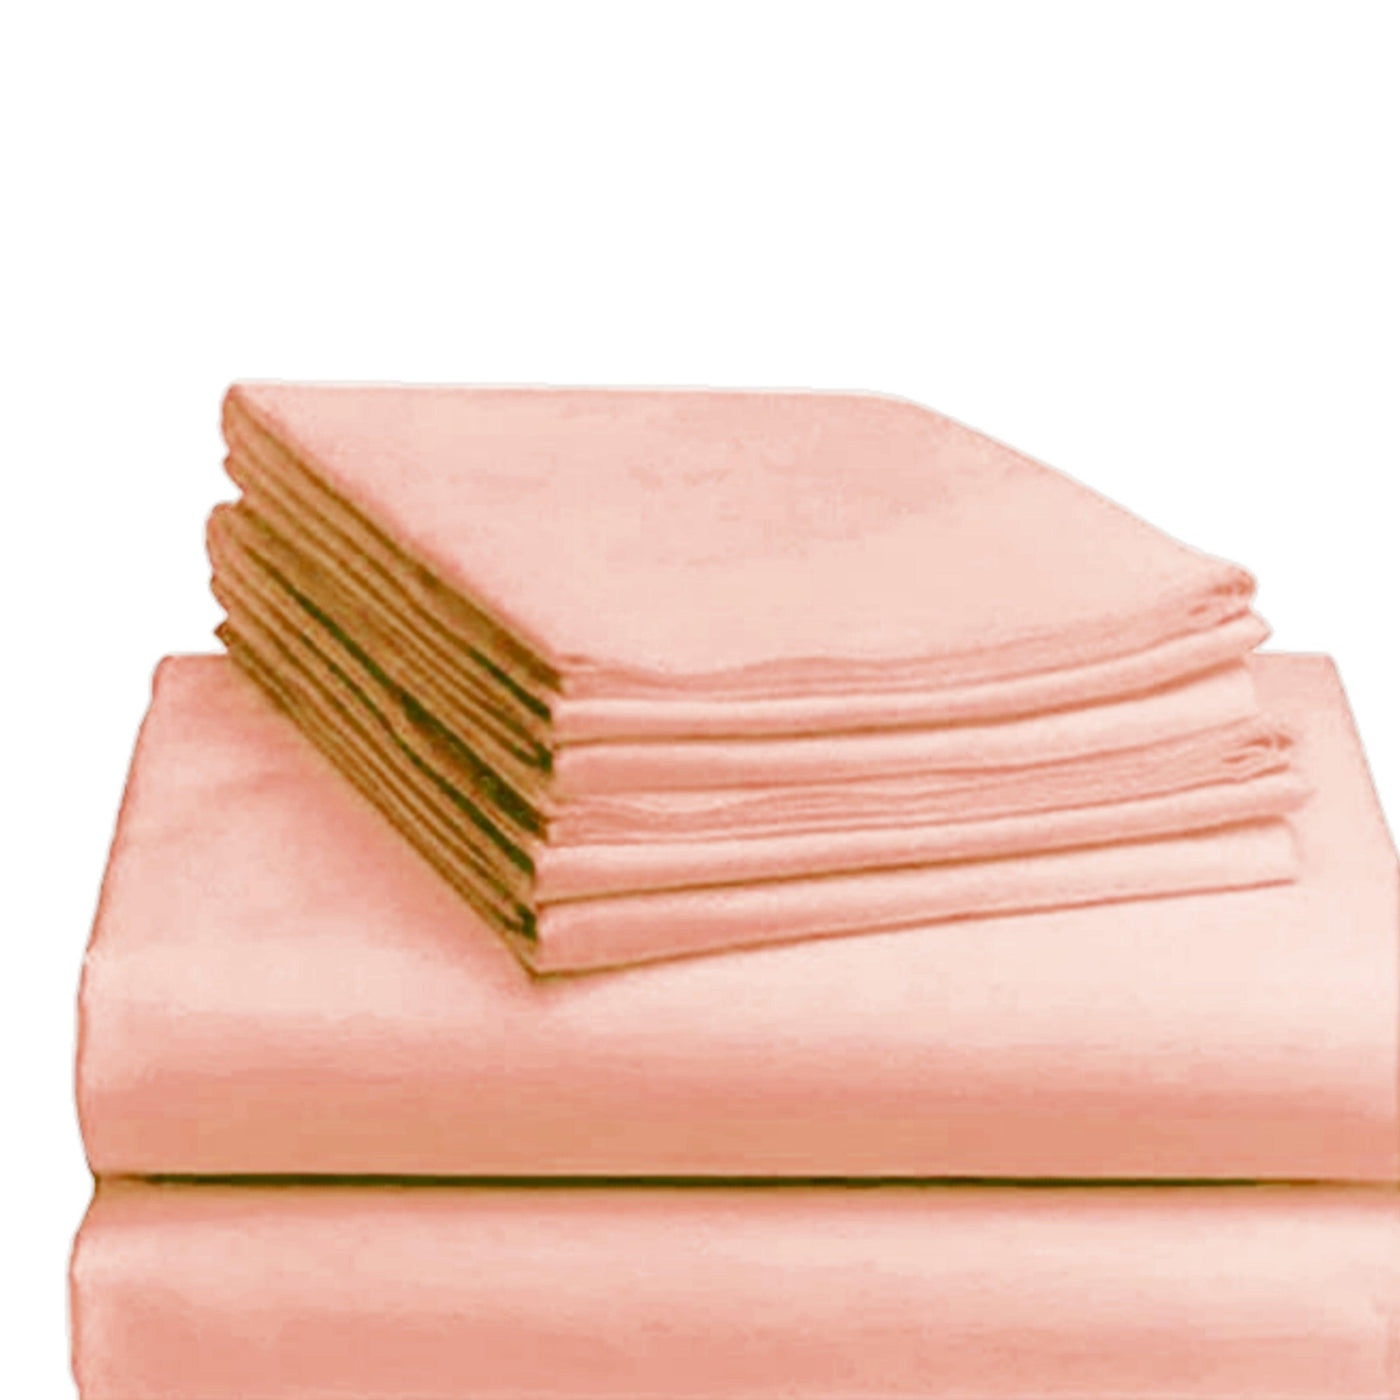 Trance Home Linen Cotton 400TC Plain Bed Sheet with Pillow Cover- Blush Peach